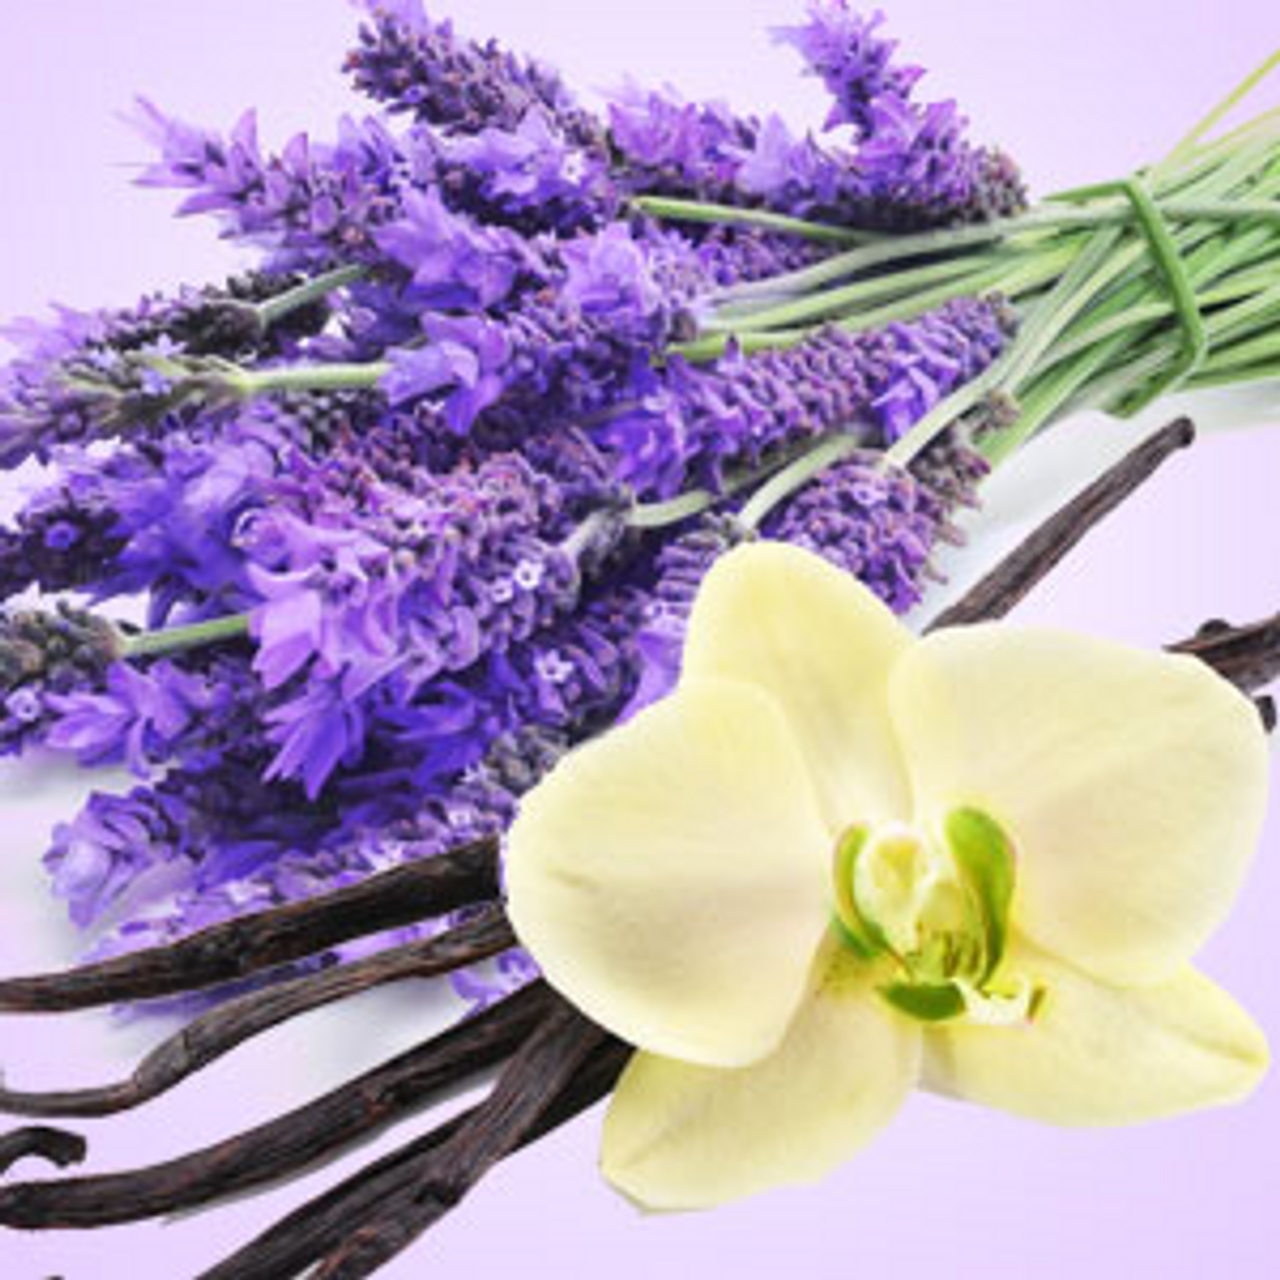 https://cdn11.bigcommerce.com/s-74757430ww/images/stencil/1280x1280/products/377/6597/NG-Vanilla-Lavender-Fragrance-Oil__13102.1666377785.png?c=1